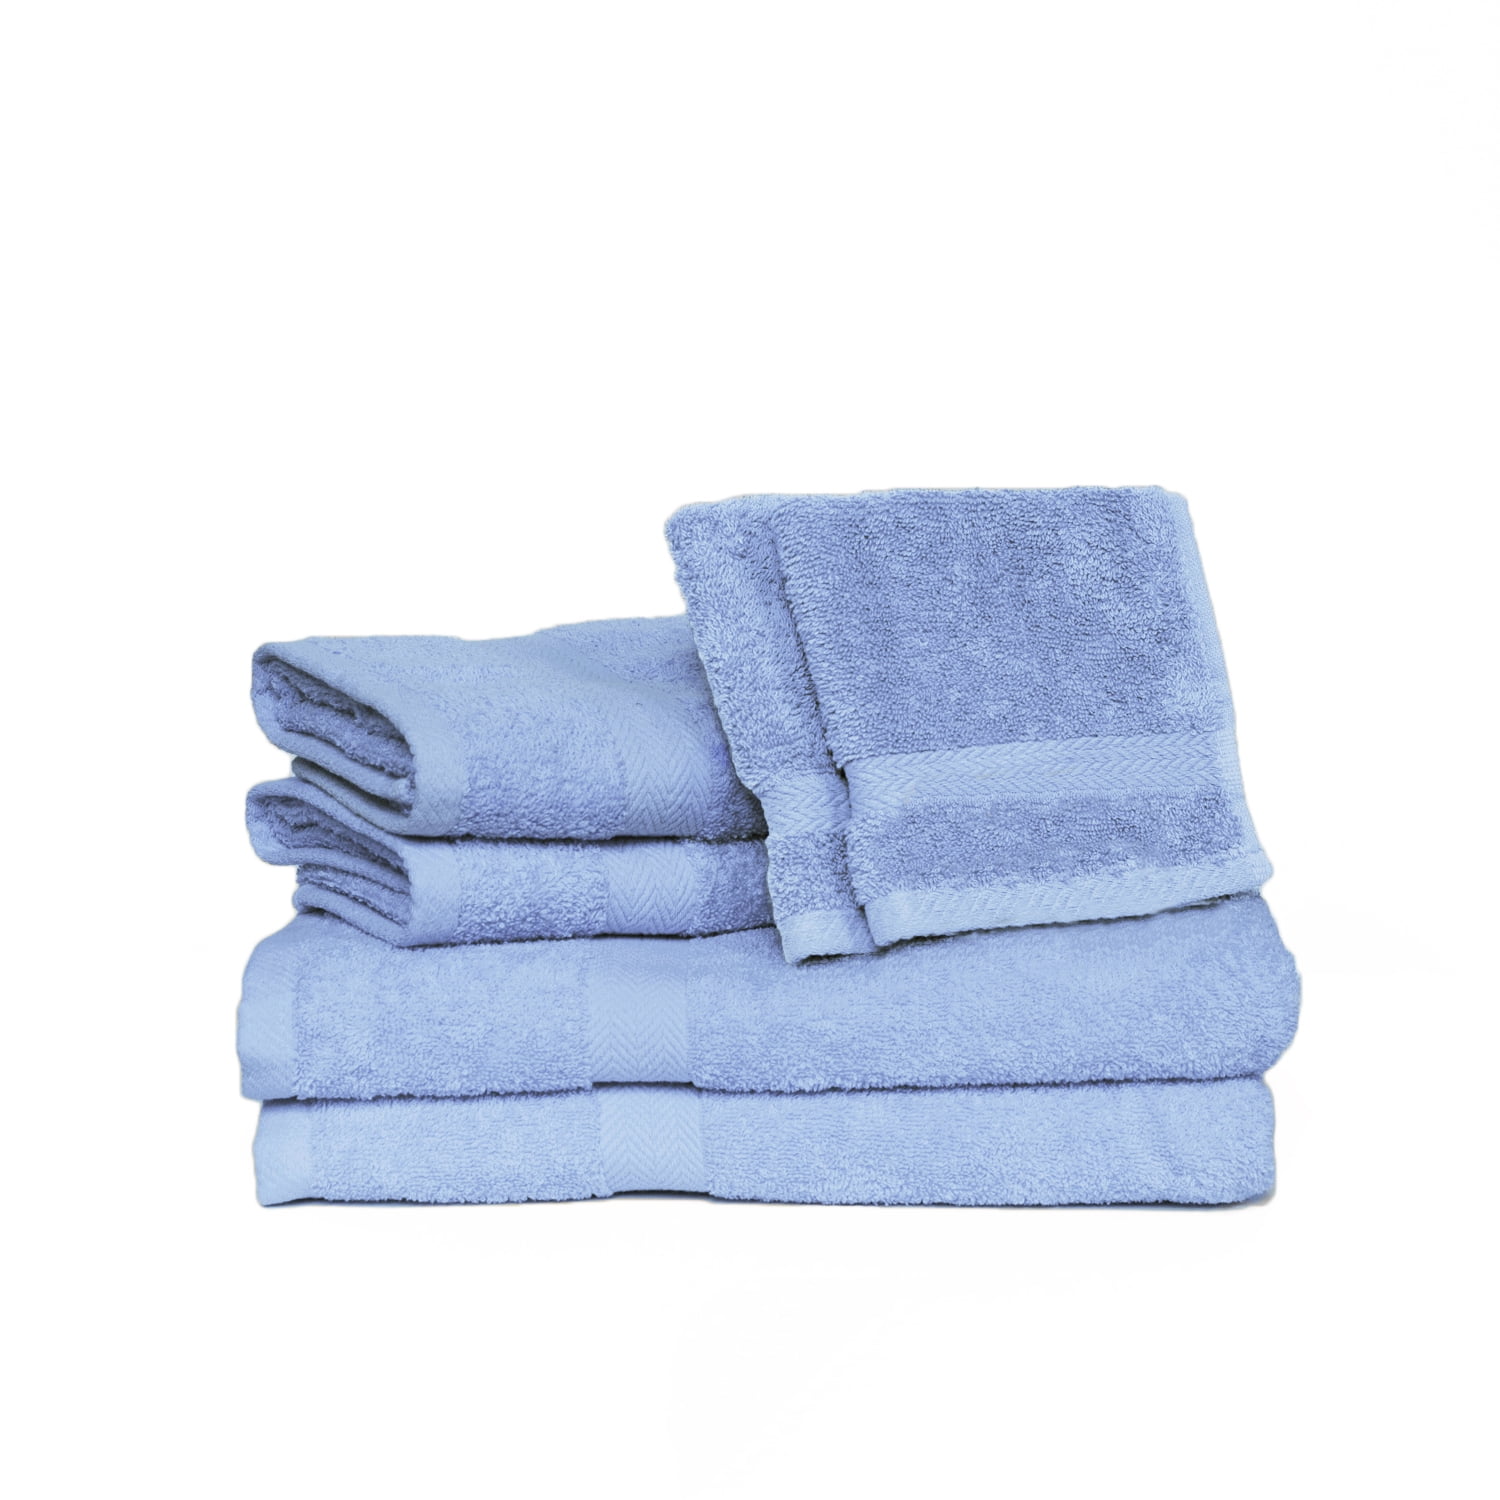 6-Piece Shower Robe Purity Odor Resistant Towel Set Quick Dry Towel Beach  Mineral Large Beach Towels Bathroom Set Luxury Poncho - AliExpress